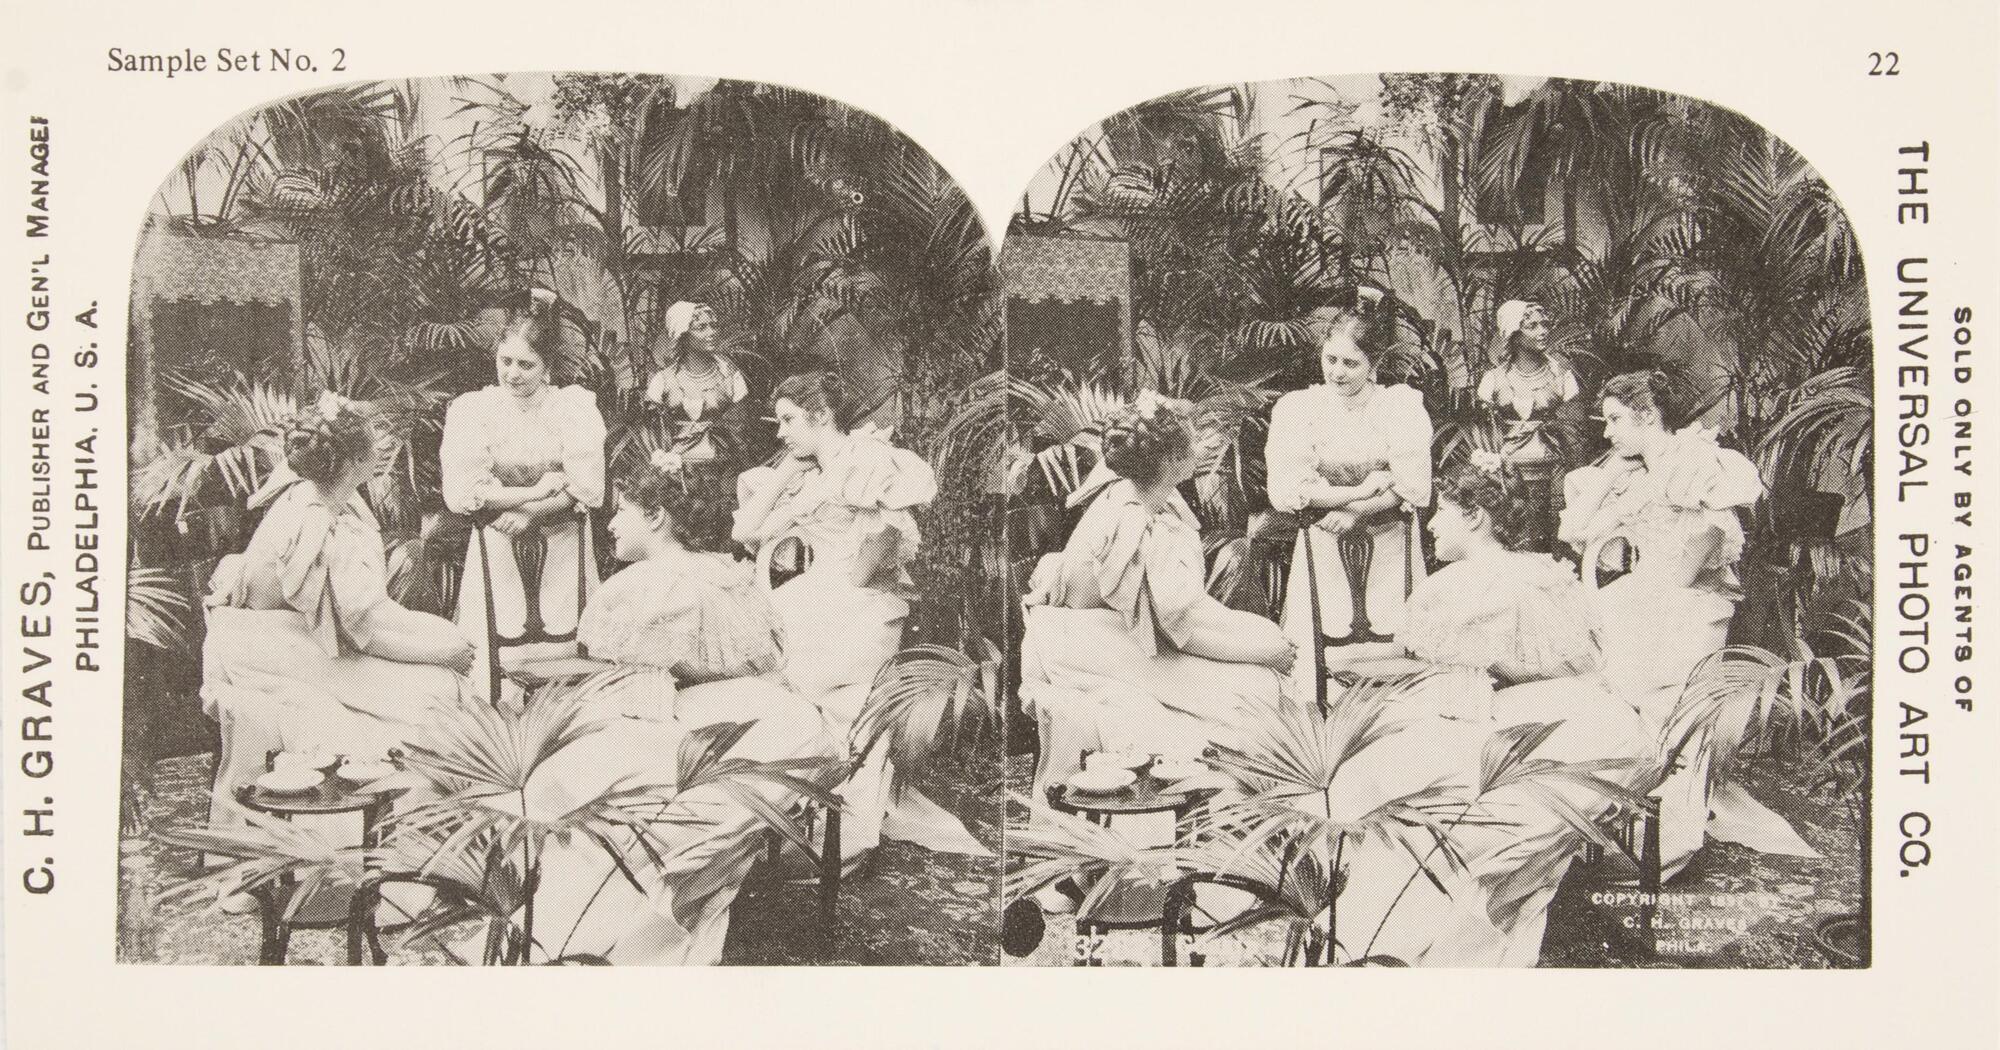 This black and white stereoscopic image features two images of four women sitting together outside in white dresses. Around them are tropical plants, a statue of a female head and bust and a small table with teacups in the lower left.